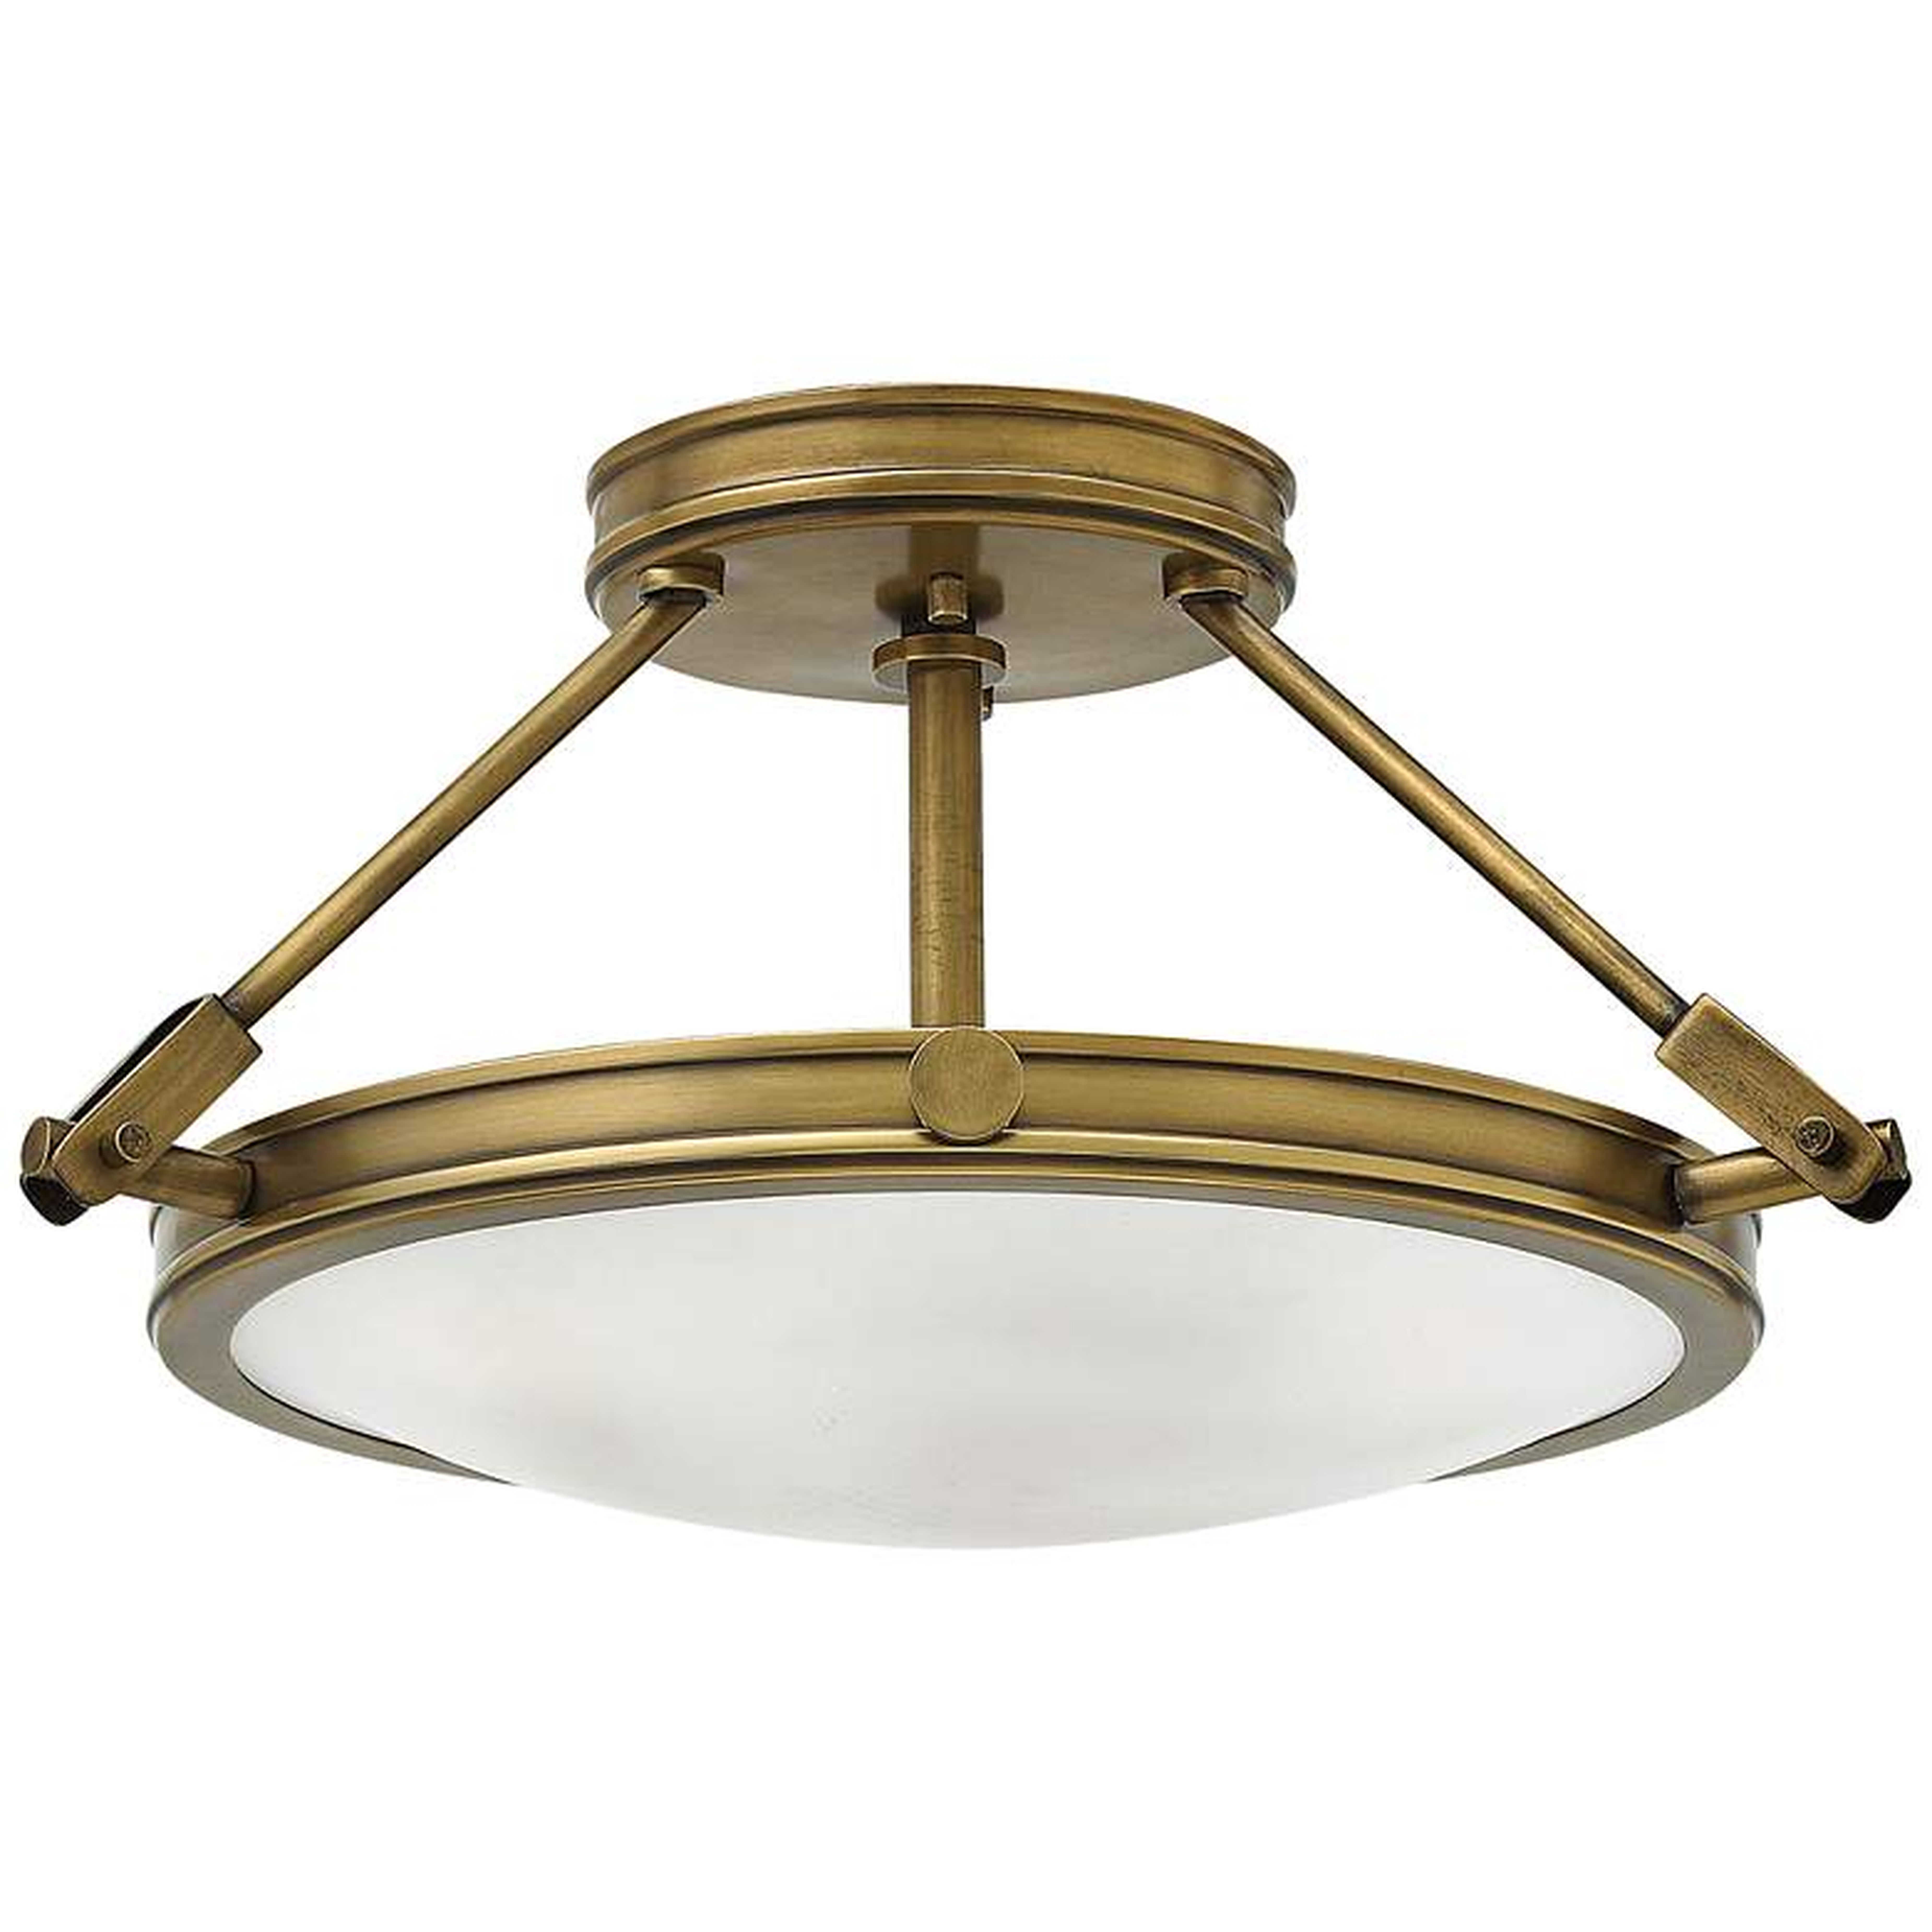 Hinkley Collier 16 1/2" High Heritage Brass Ceiling Light - Lamps Plus